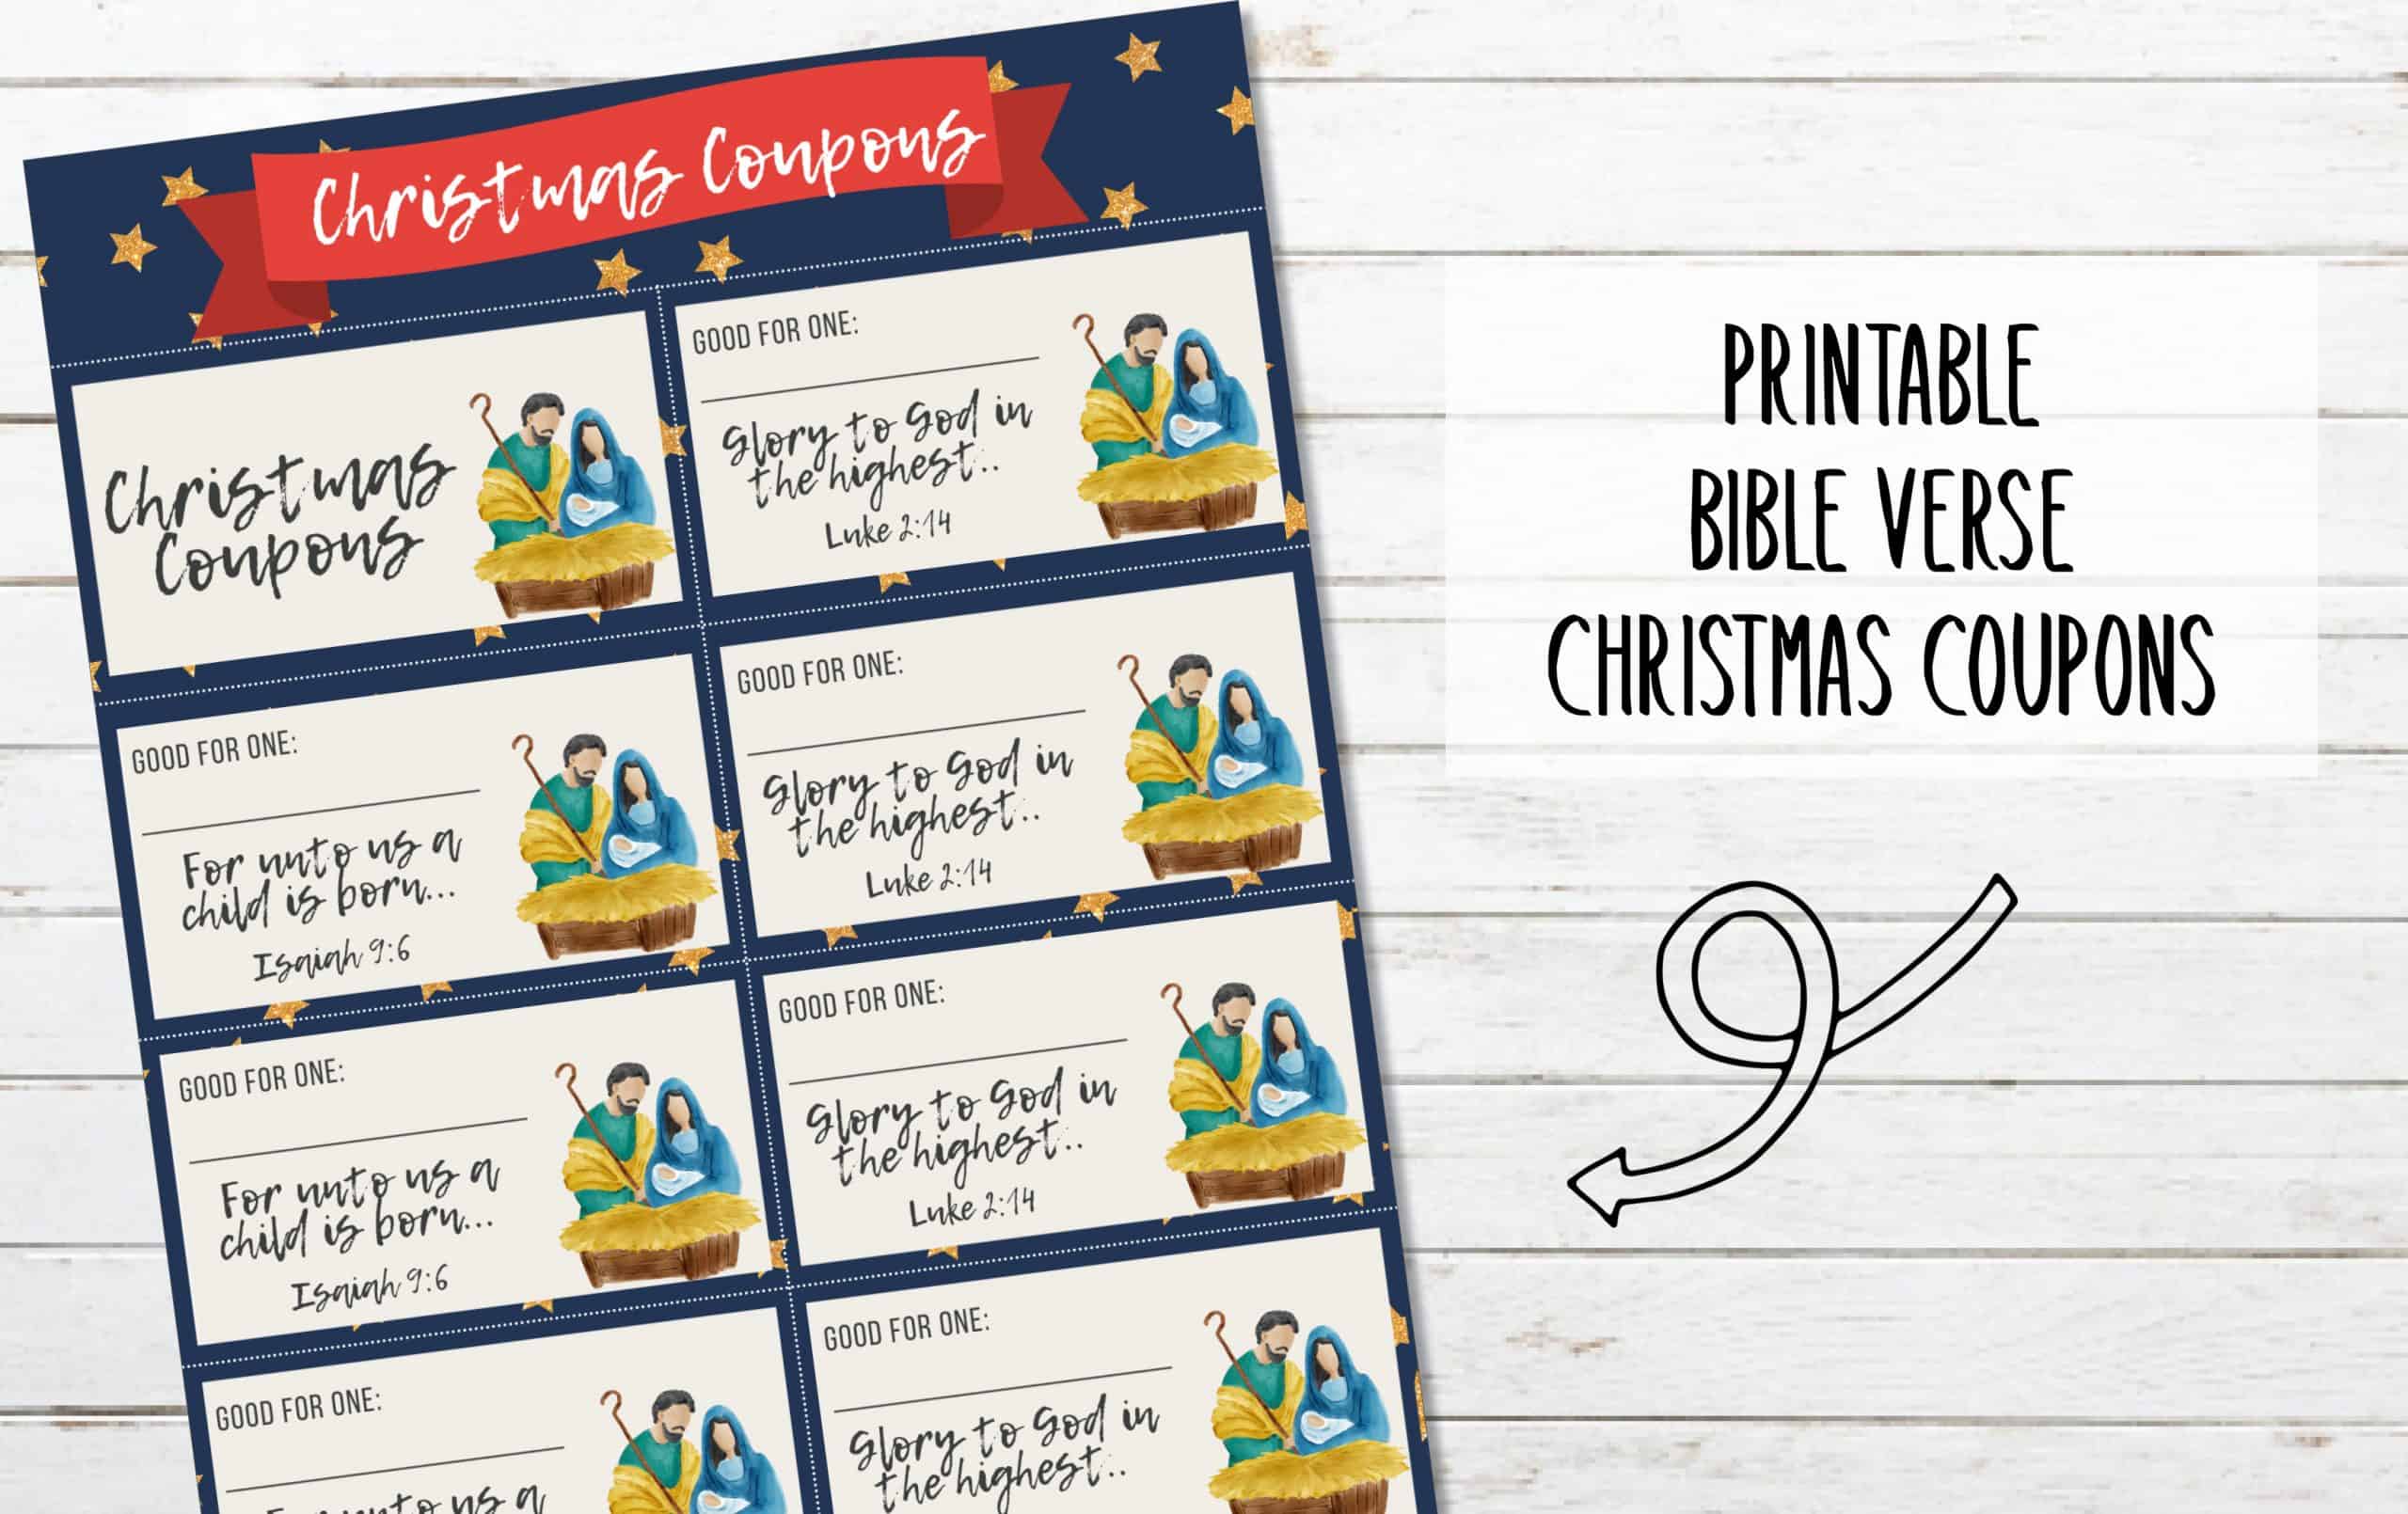 Printable Christmas Gift Coupons {with Scriptures}